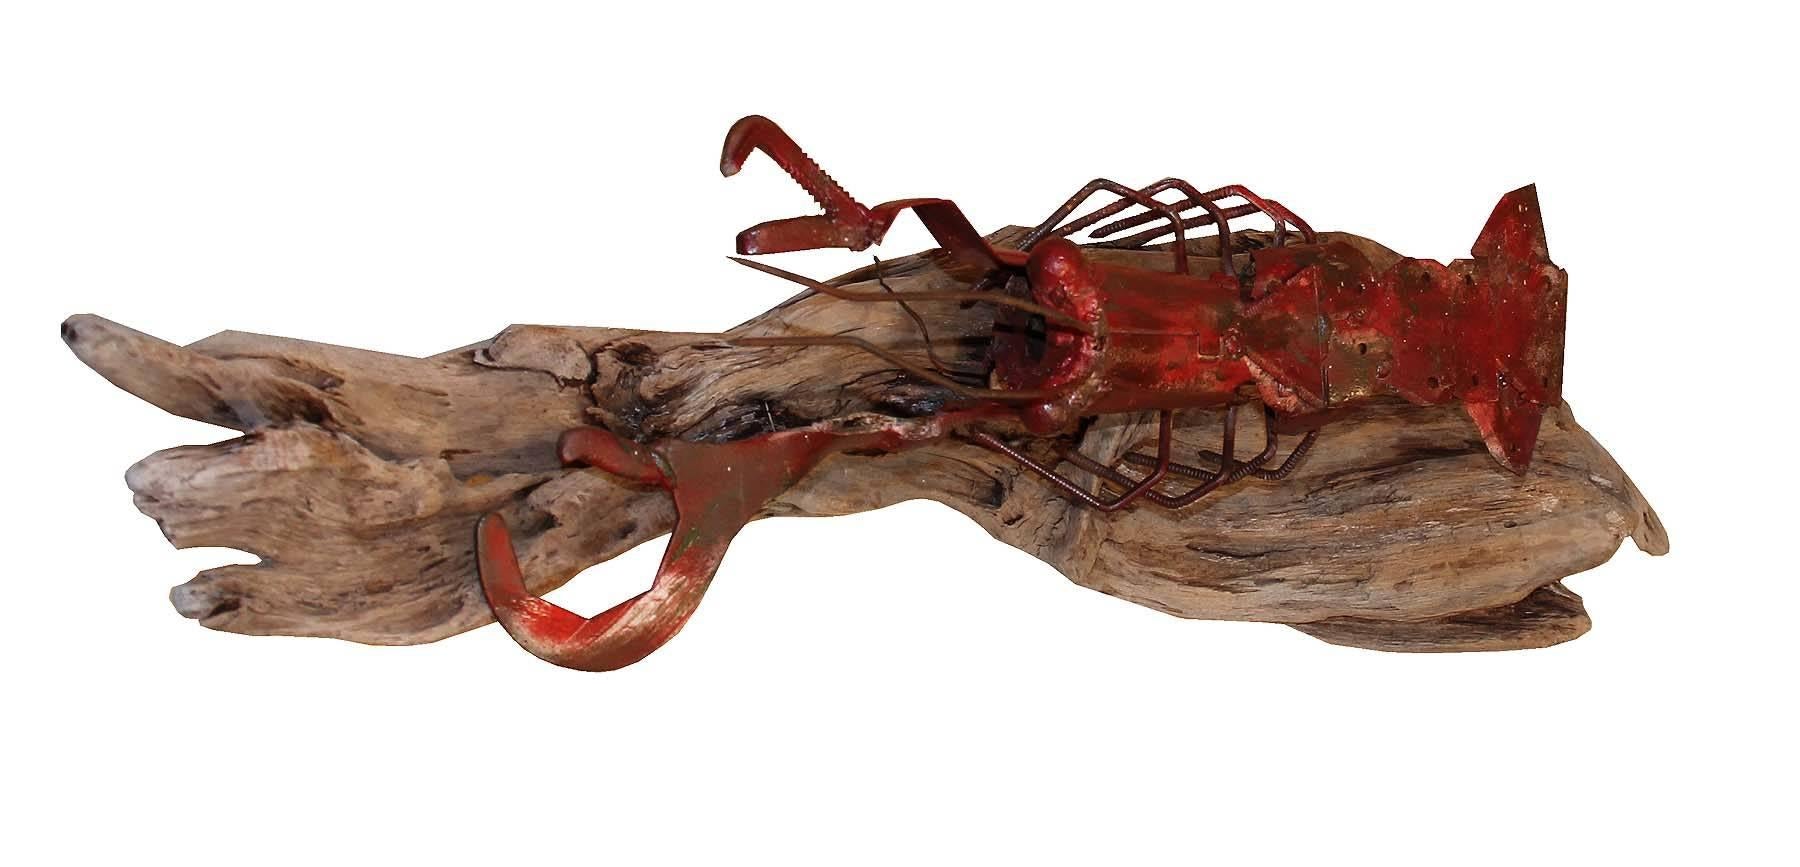 A wonderful piece of Folk Art. The lobster is made from steel wrenches, screws and steel trim. A unique item mounted on a beautiful chunk of driftwood that balances the hard angles of the sculpture with a the soft natural grain flow of the bleached